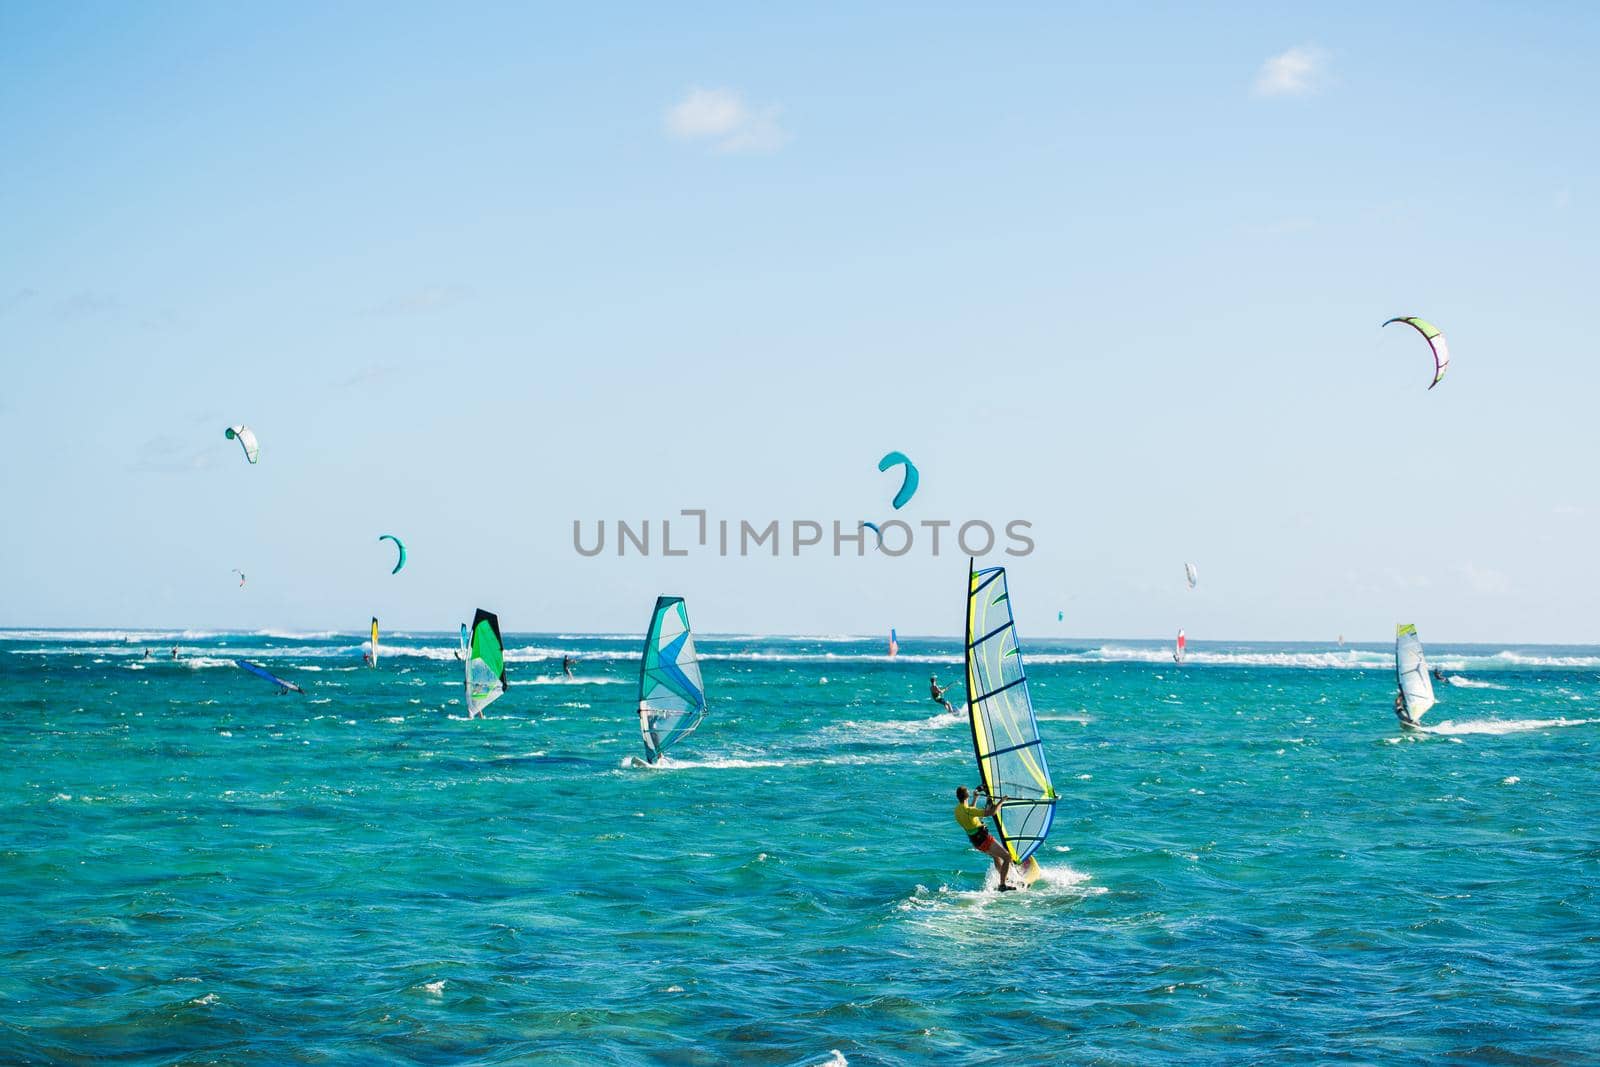 Windsurfers on the Le Morne beach in Mauritius. by StudioPeace